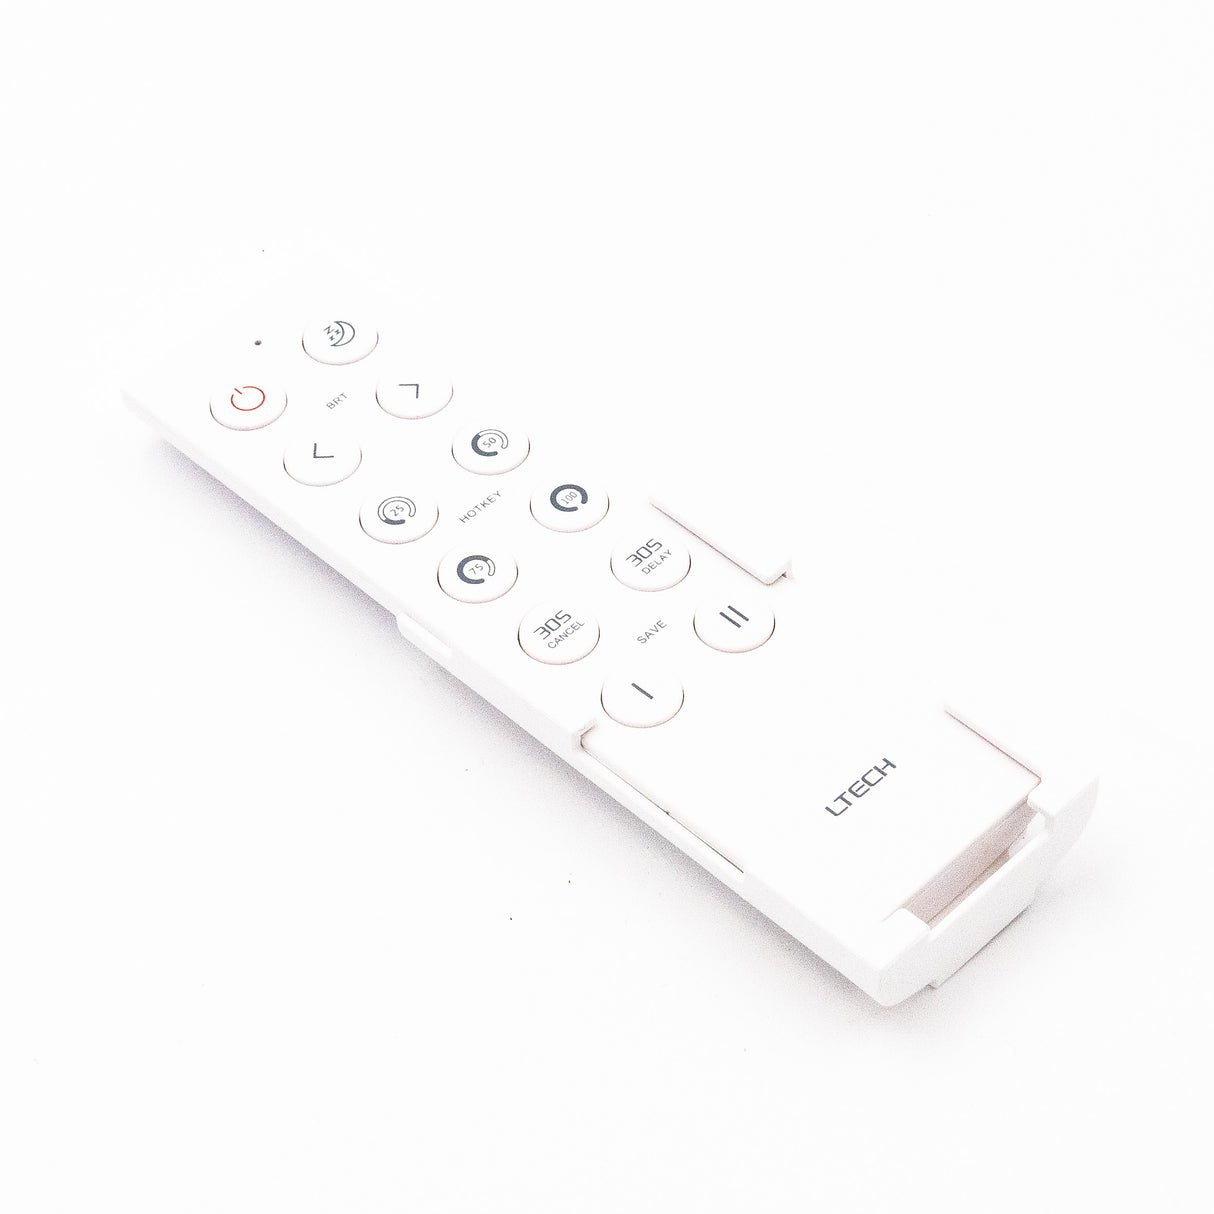 Ltech F1 2.4GHz RF Dimming remote control - PHOTO 1